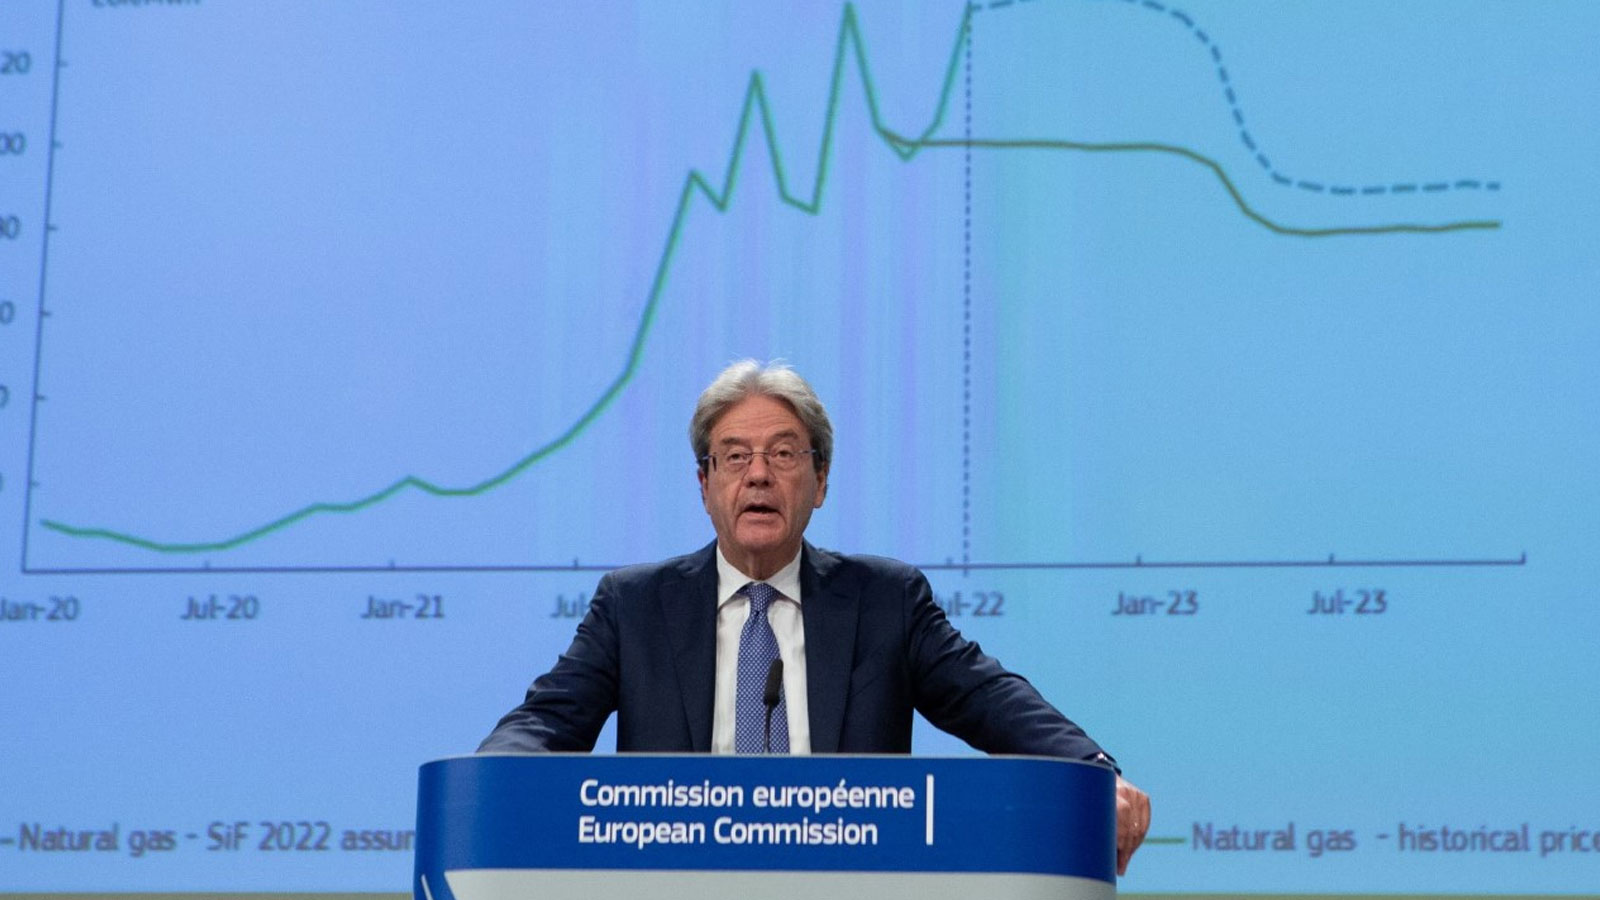 Paolo Gentiloni, EU Commissioner for Economy, gives a press conference on the Summer Economic Forecast